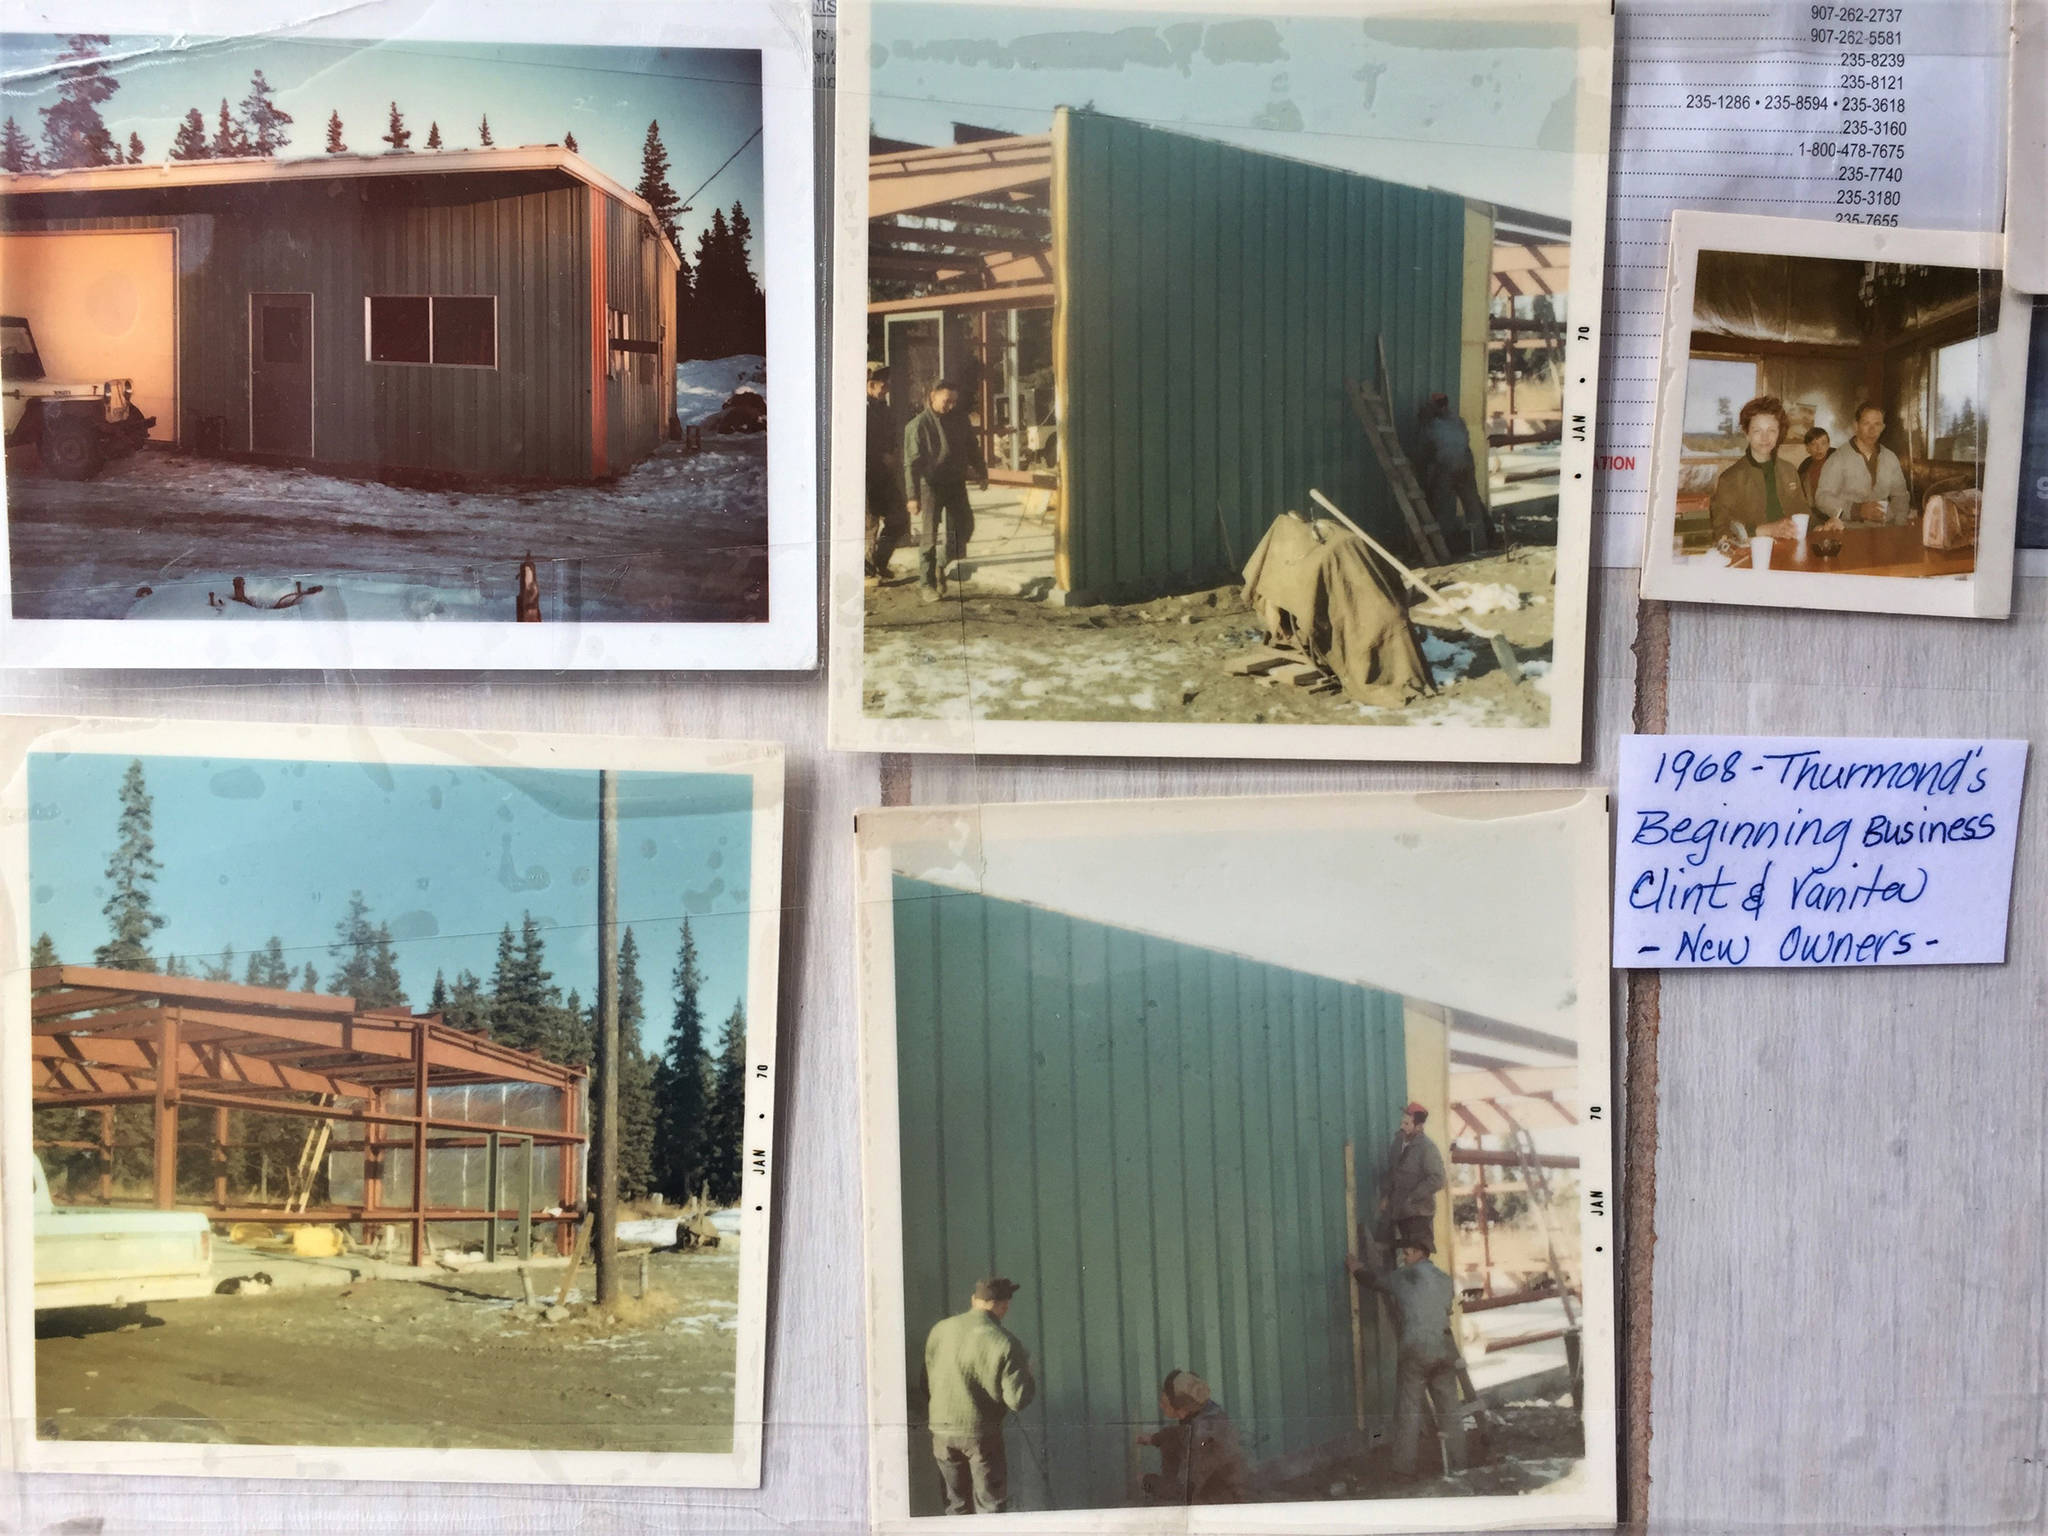 A collection of old photographs from 1968, when Thurmond’s was first being built in Anchor Point by Clint and Vanita Thurmond. (Photos courtesy of Thurmond’s Far West Auto)